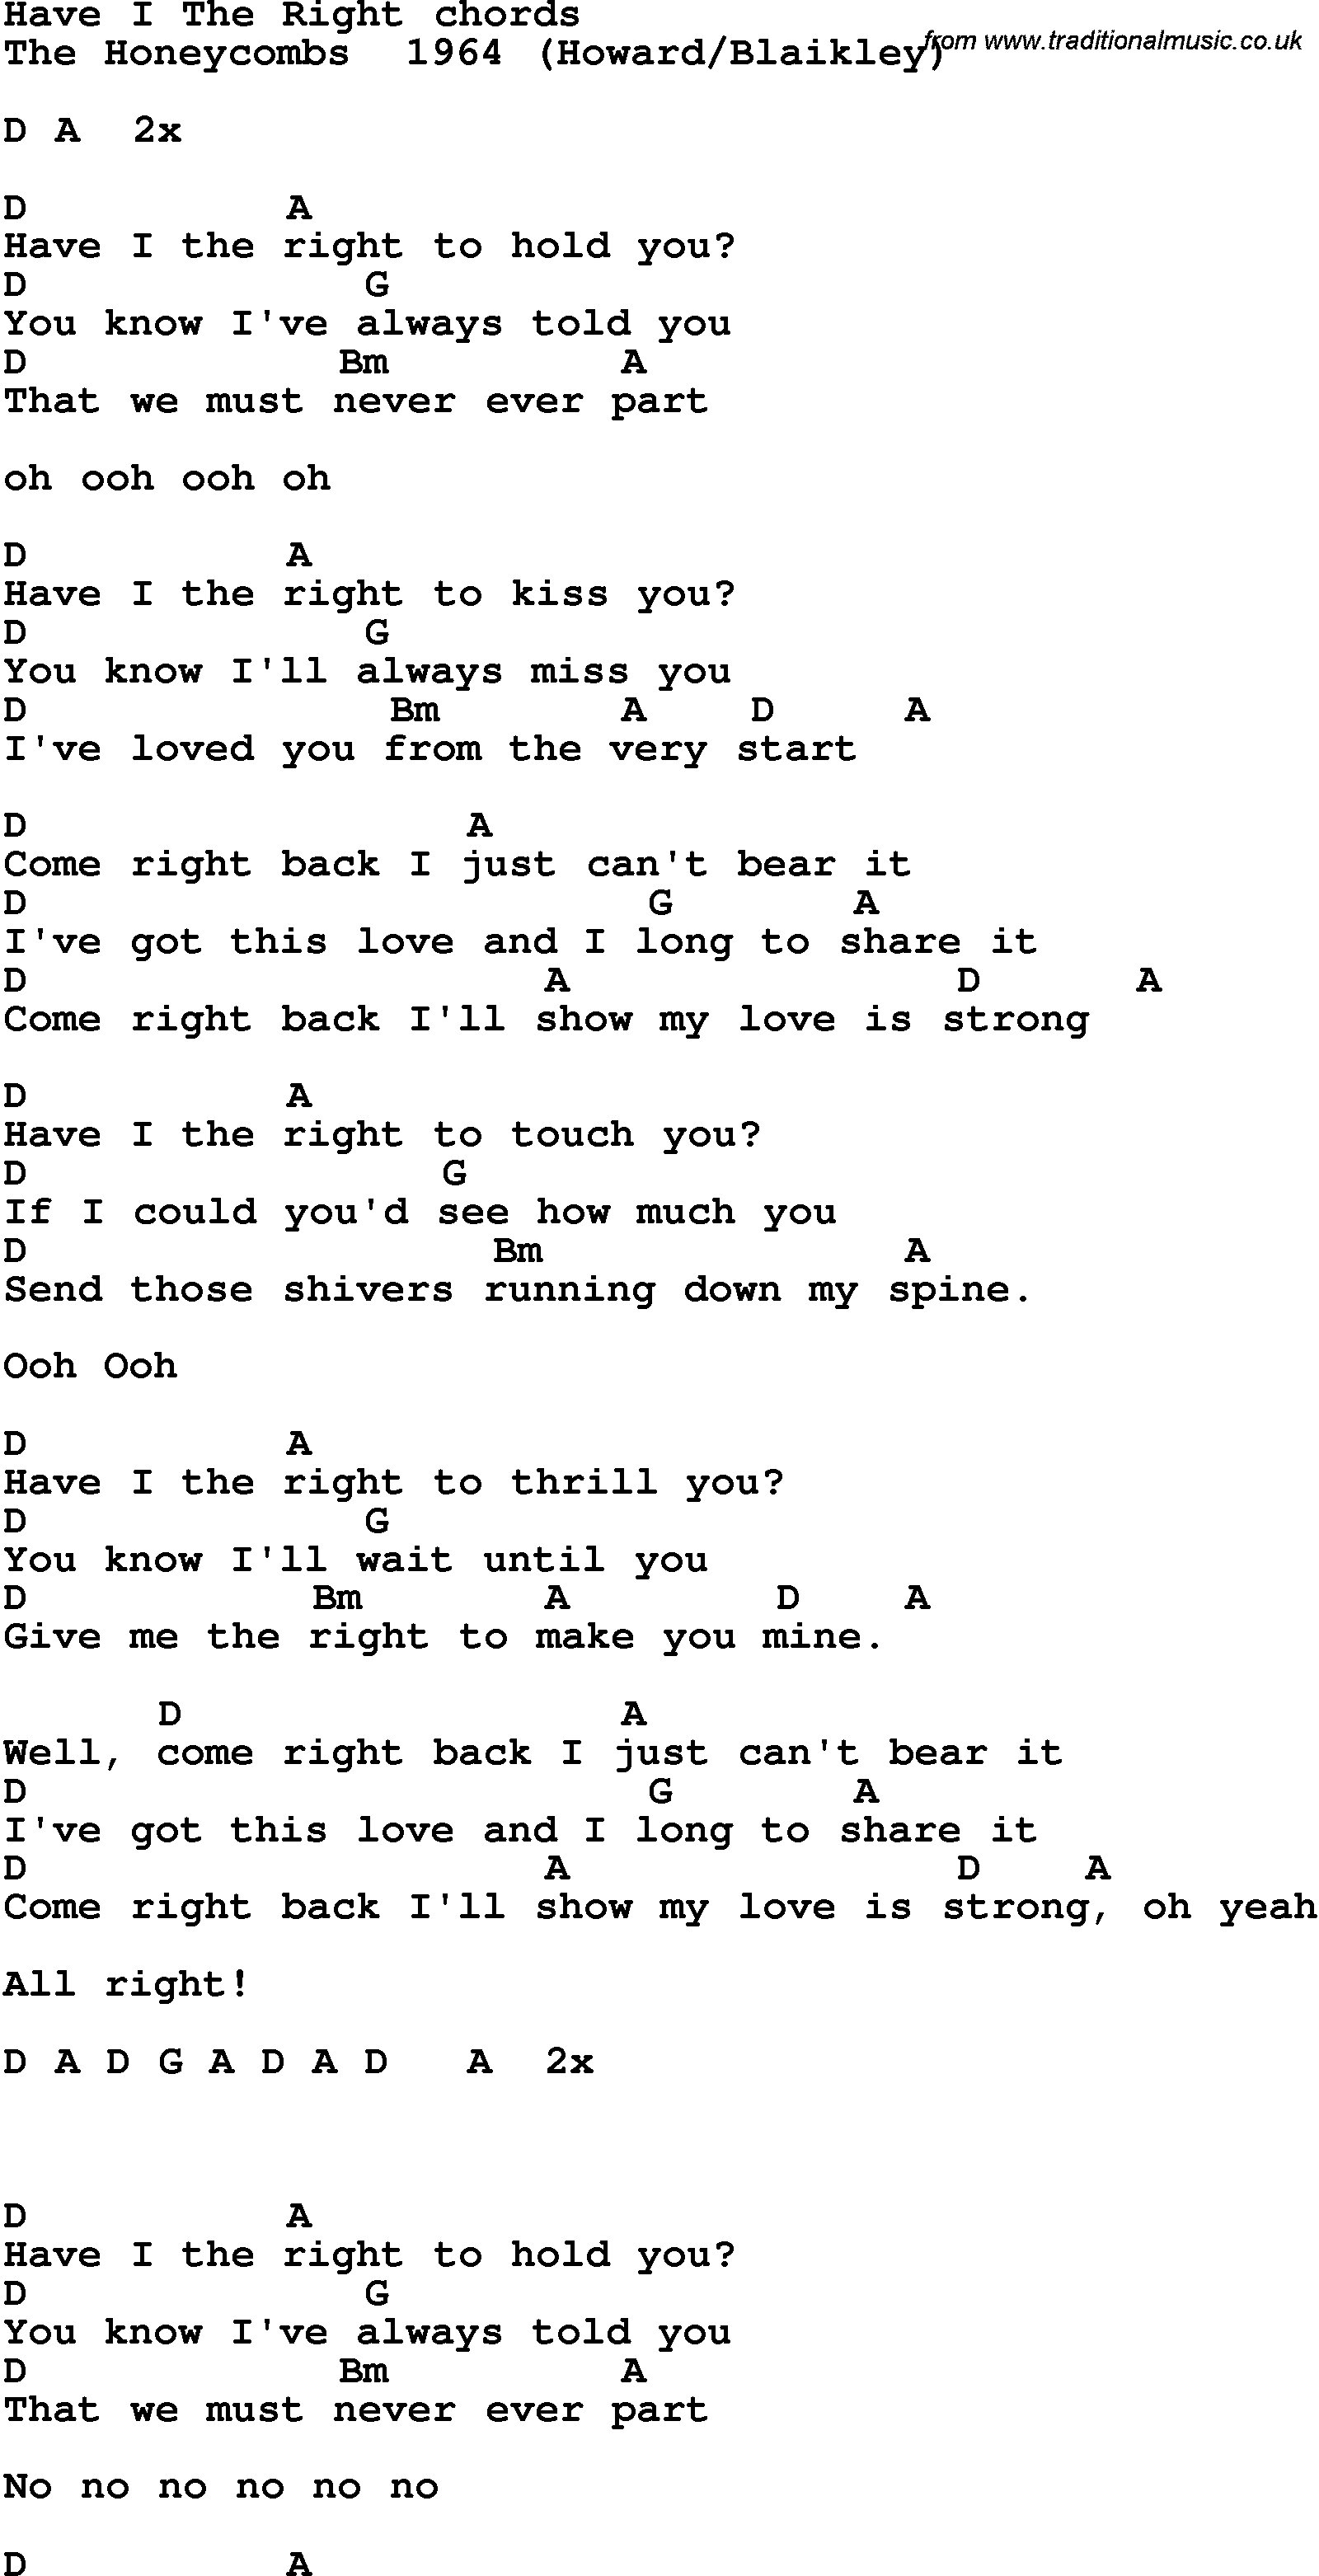 Song Lyrics with guitar chords for Have I The Right